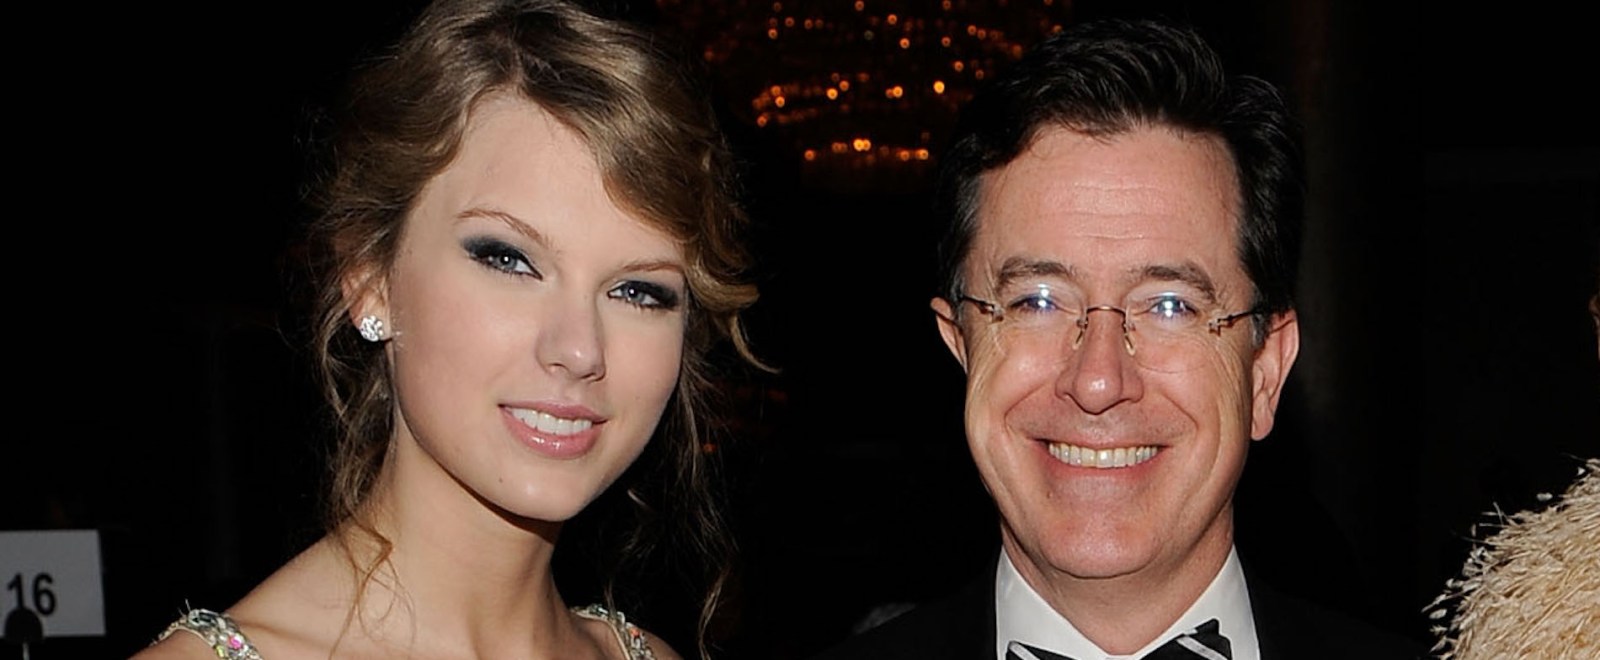 Taylor Swift Stephen Colbert 52nd Annual Grammy Awards Salute To Icons 2010